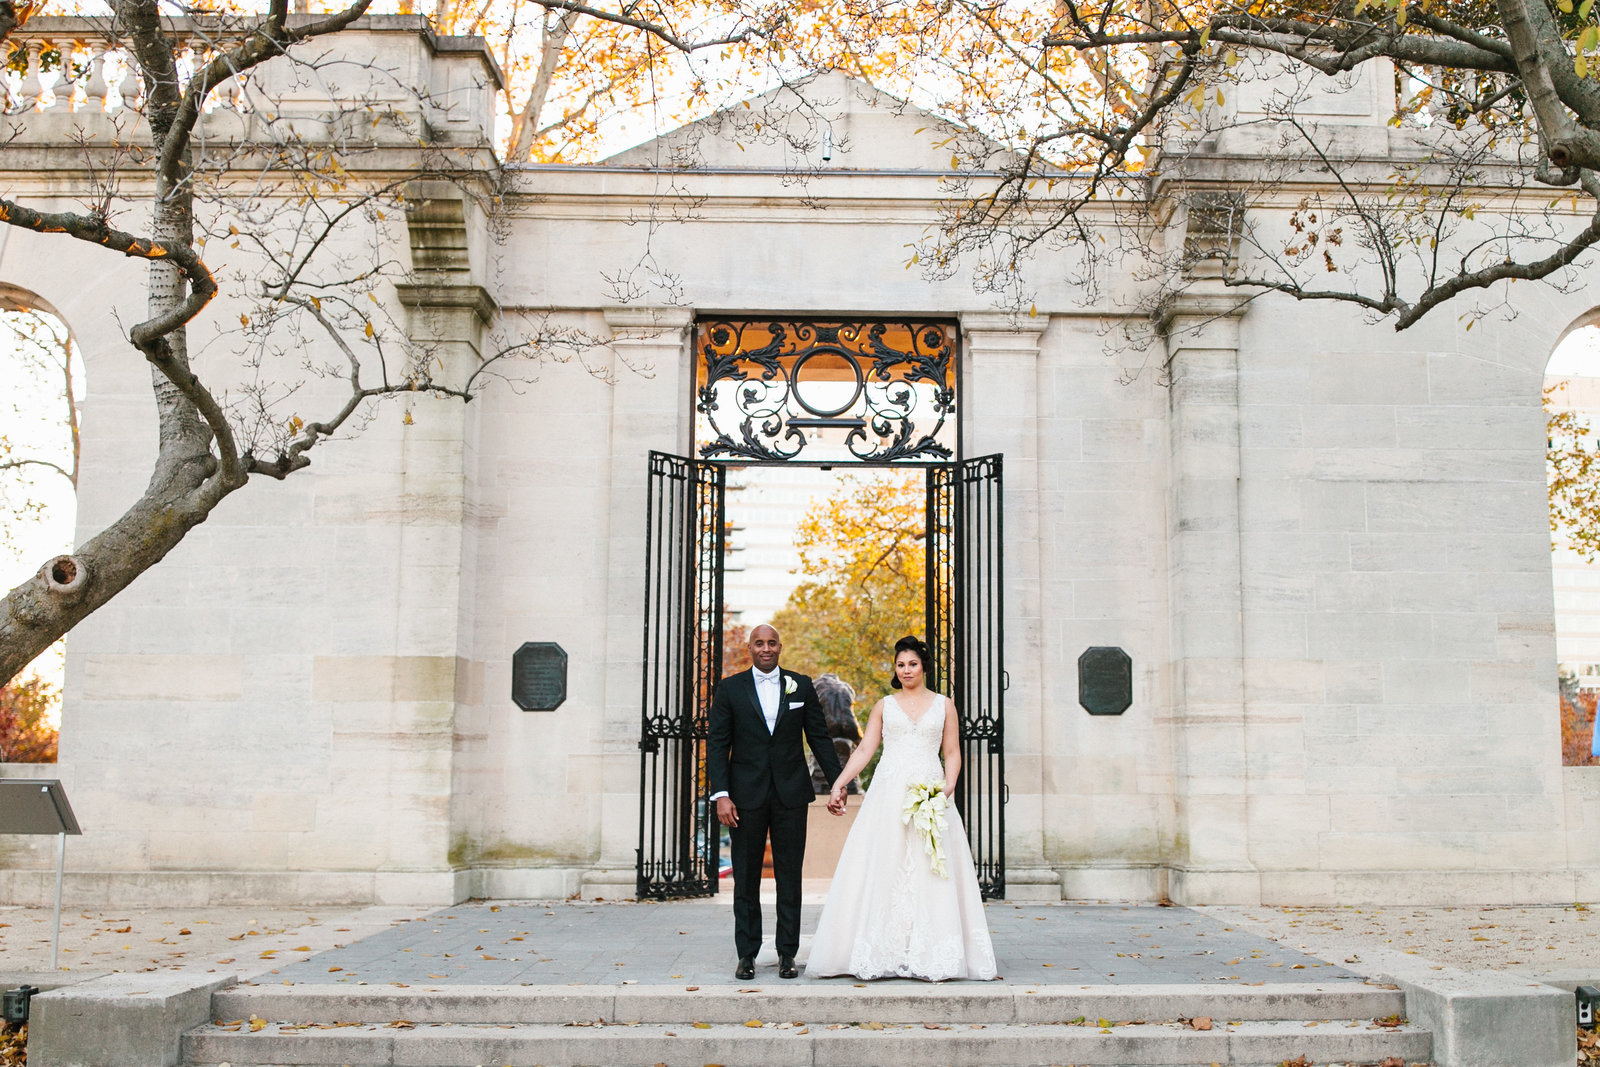 A fall wedding at the Rodin Museum in Philadelphia.